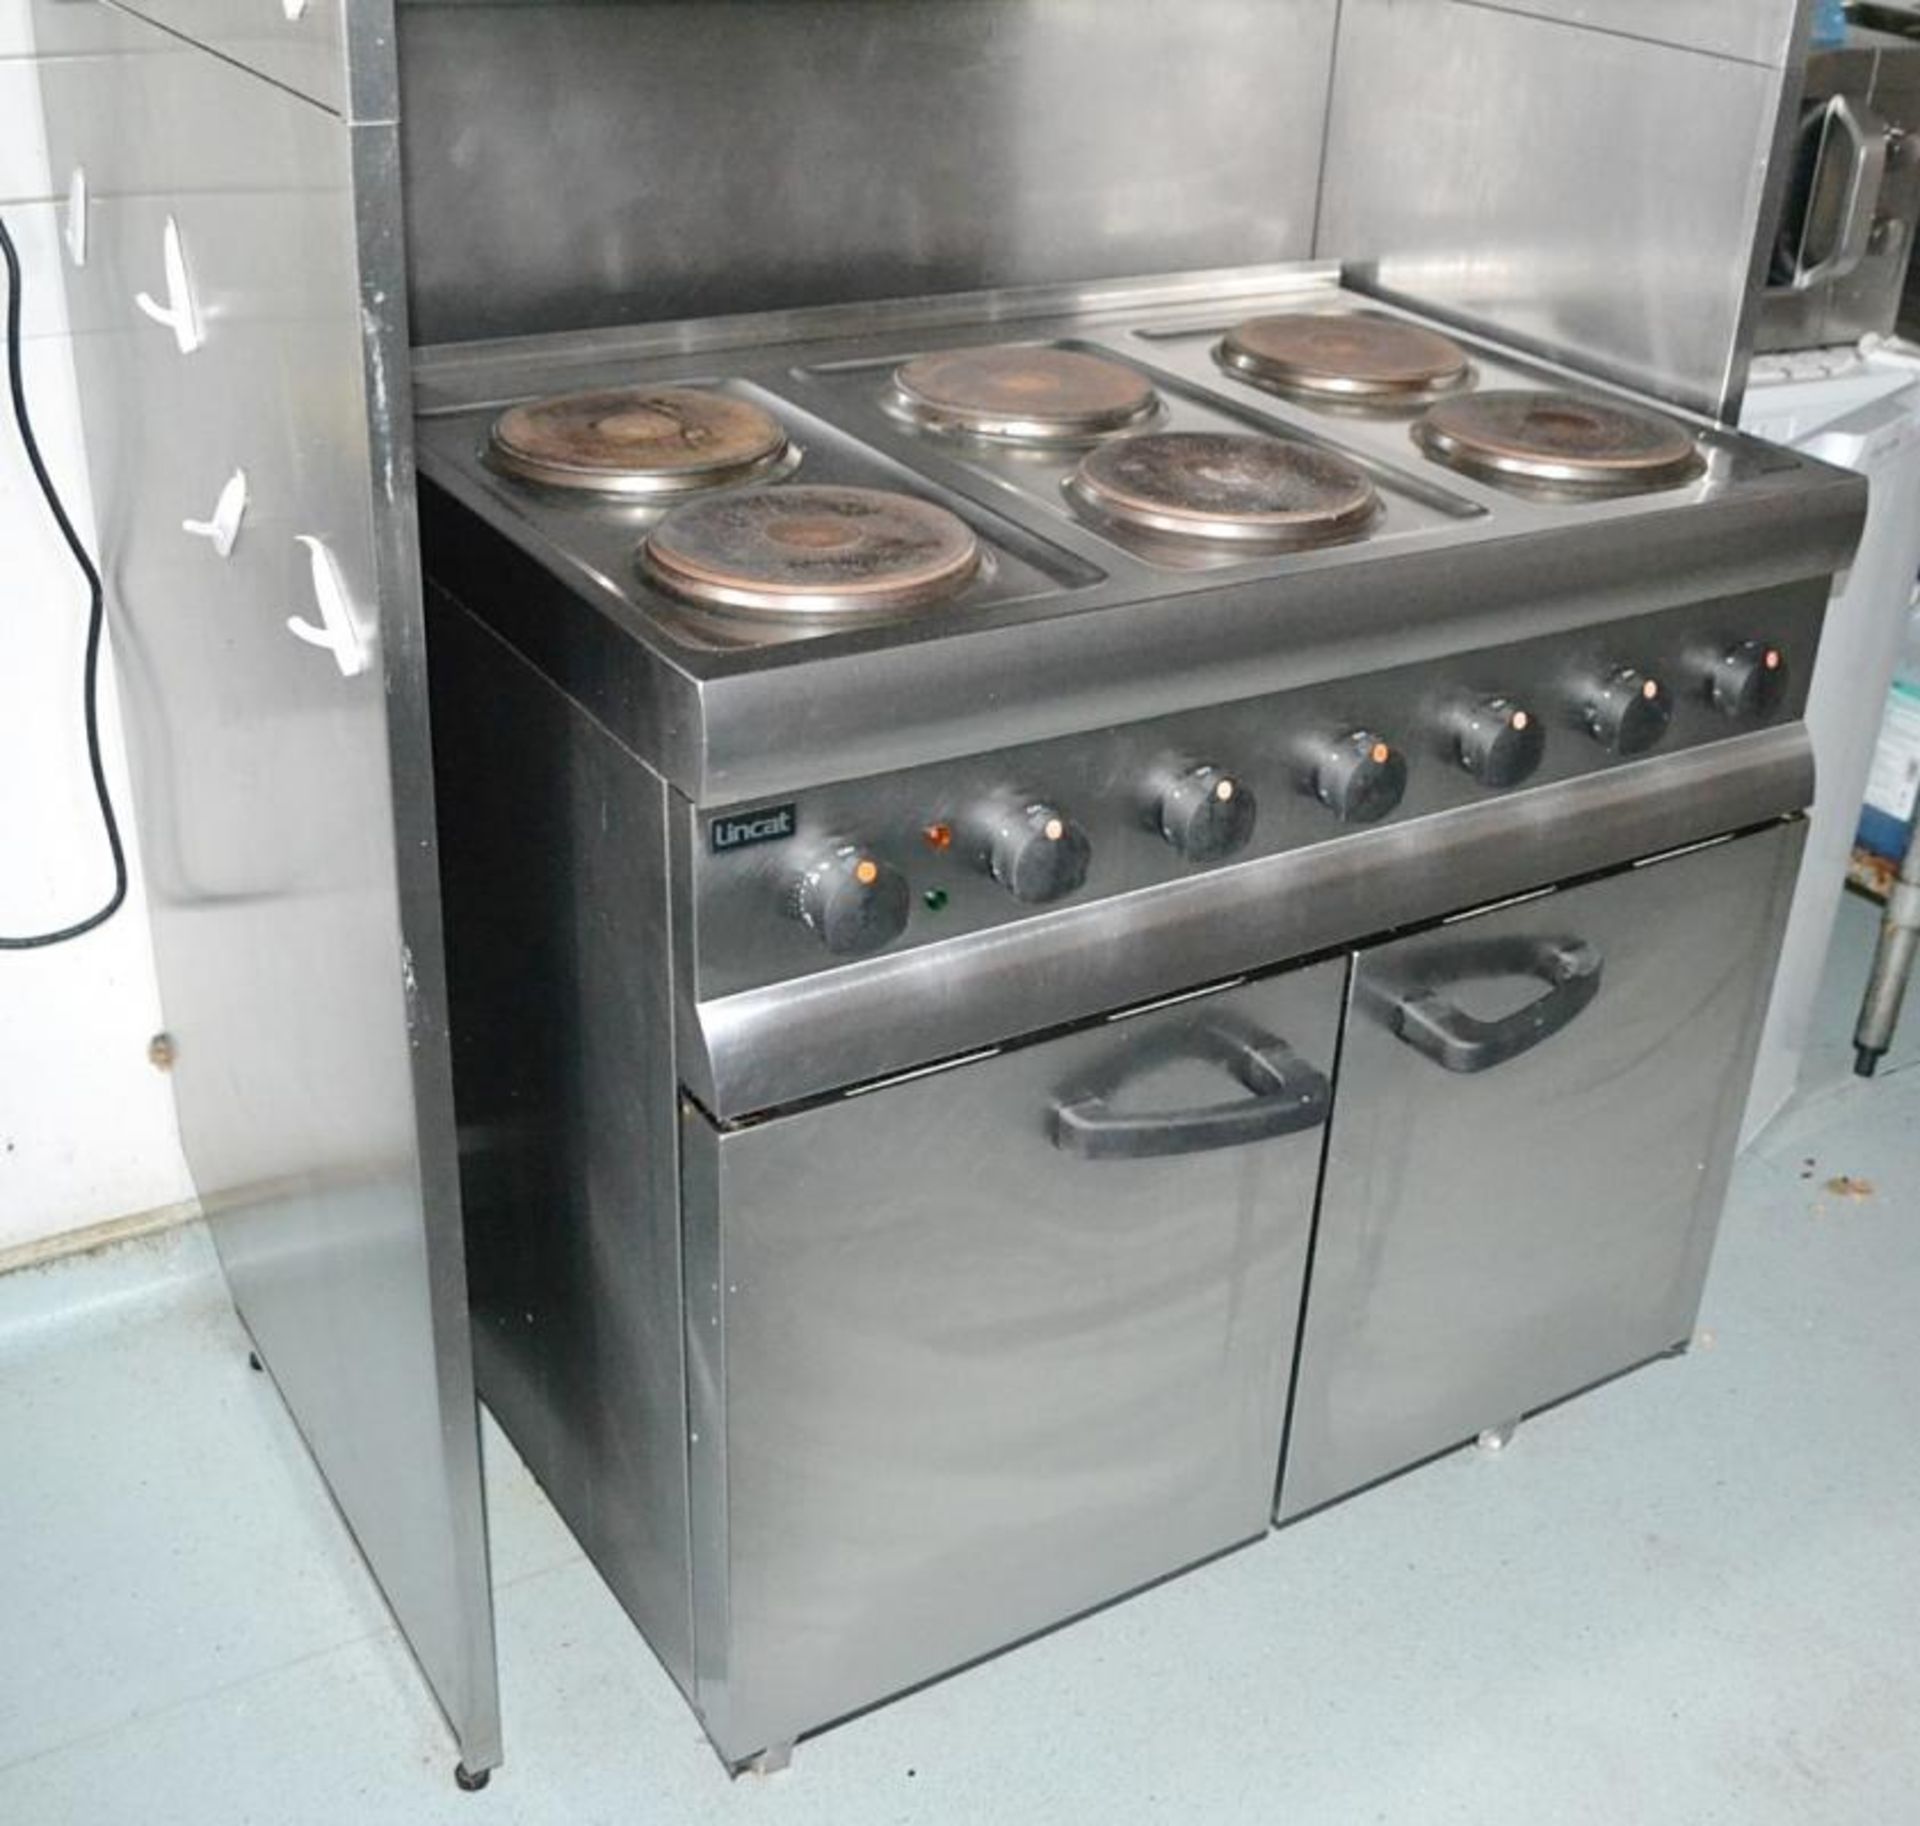 1 x Lincat Silverlink 6 Plate Commercial Electric Burner and Extraction Unit - CL425 - Location: Alt